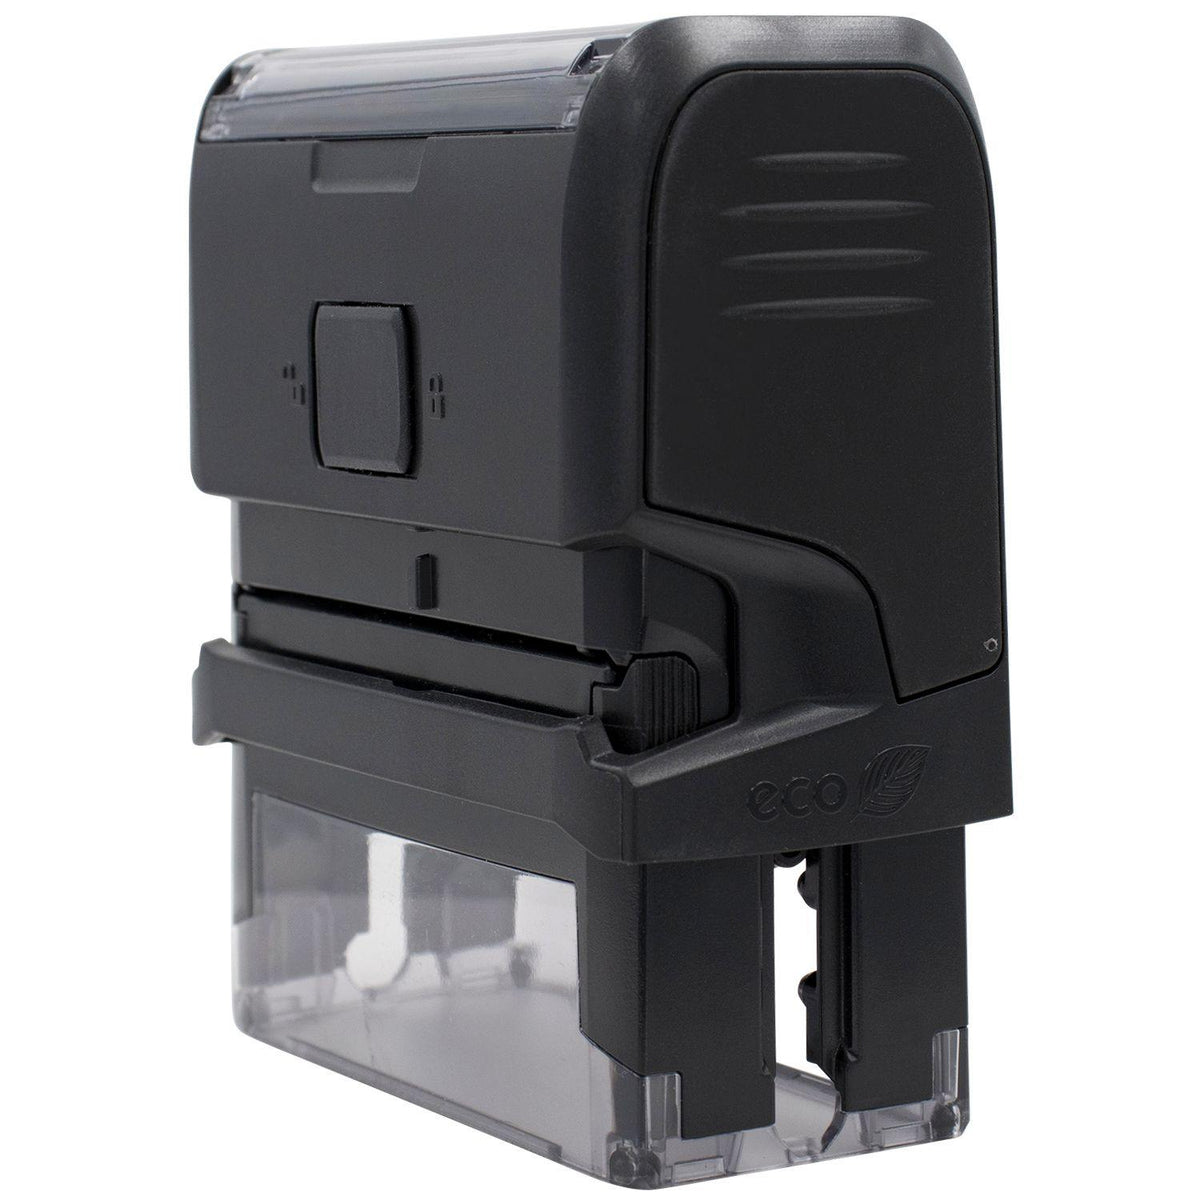 Large Self Inking Need To Improve Listening Stamp - Engineer Seal Stamps - Brand_Trodat, Impression Size_Large, Stamp Type_Self-Inking Stamp, Type of Use_Teacher